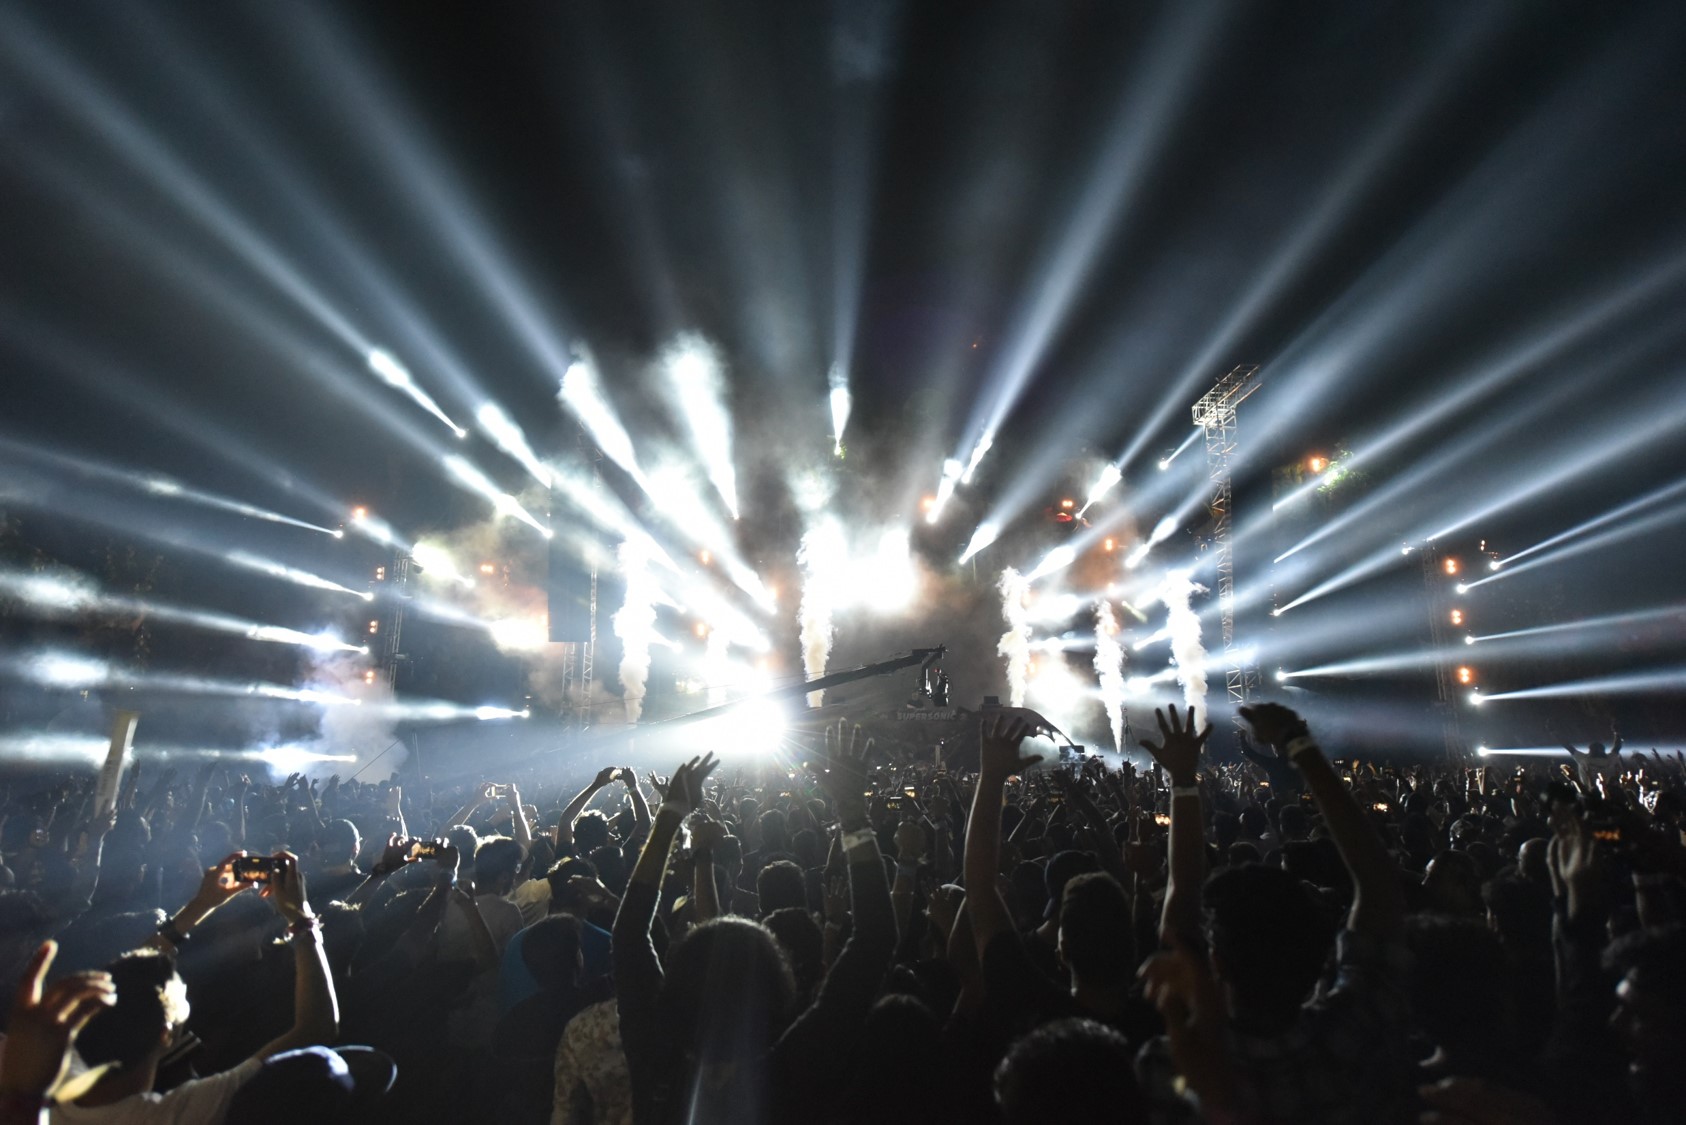  Fans cheer on as Eric Prydz headlines Vh1 Supersonic Day